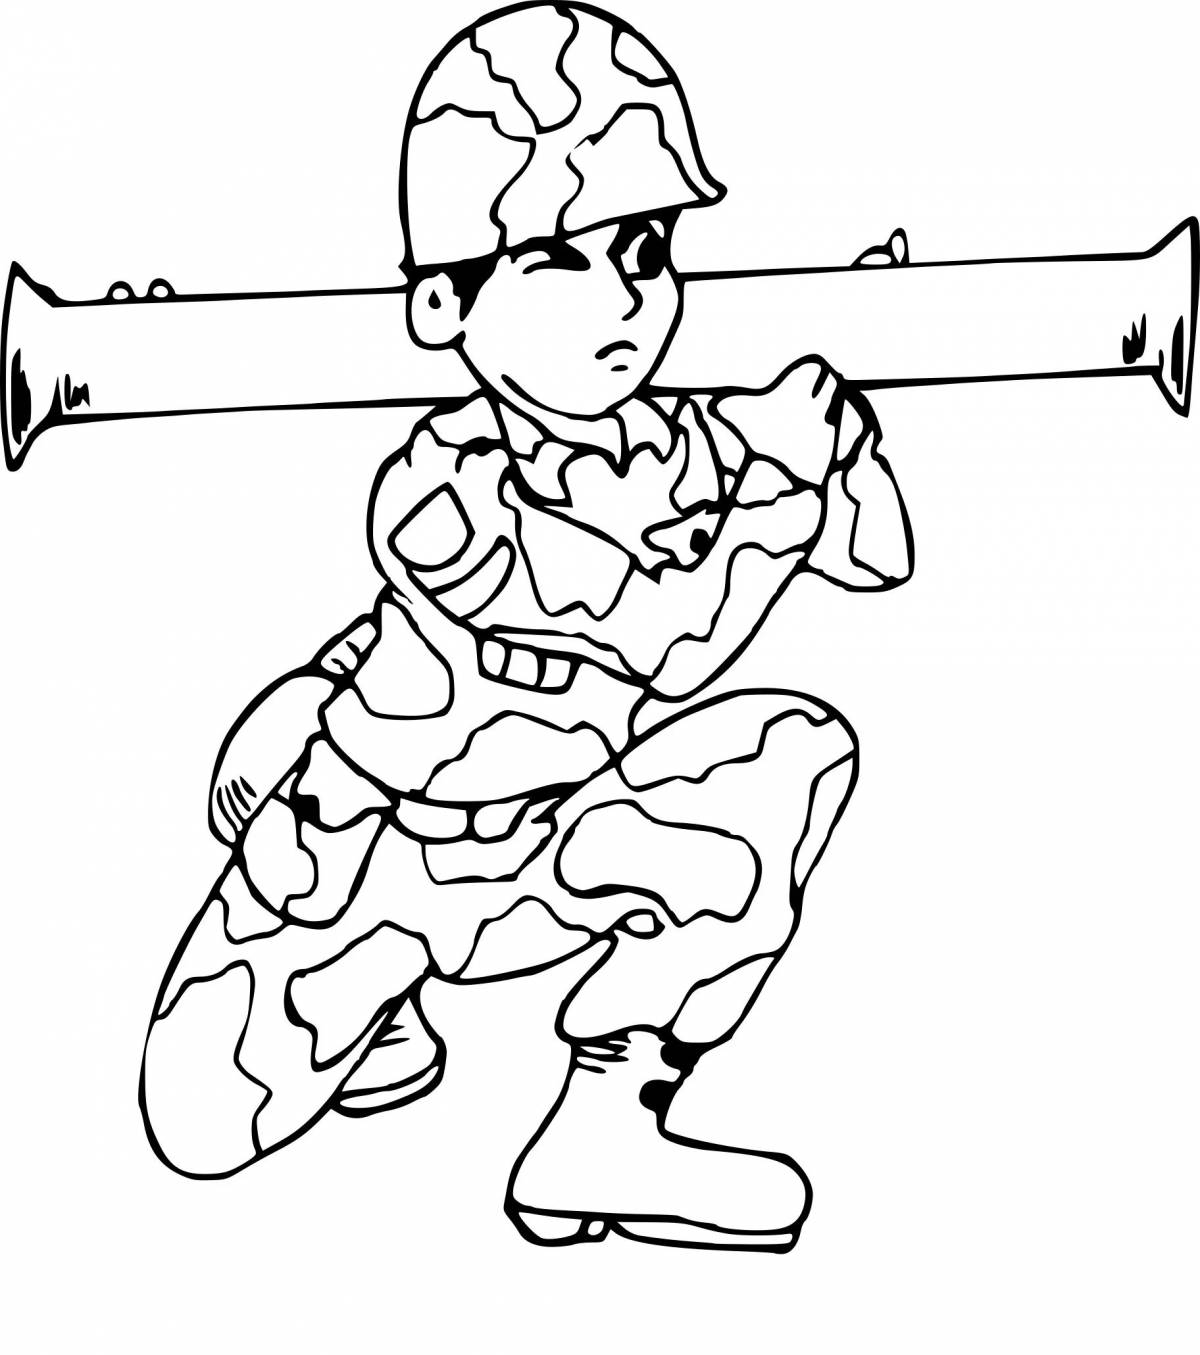 Military soldiers for kids #5